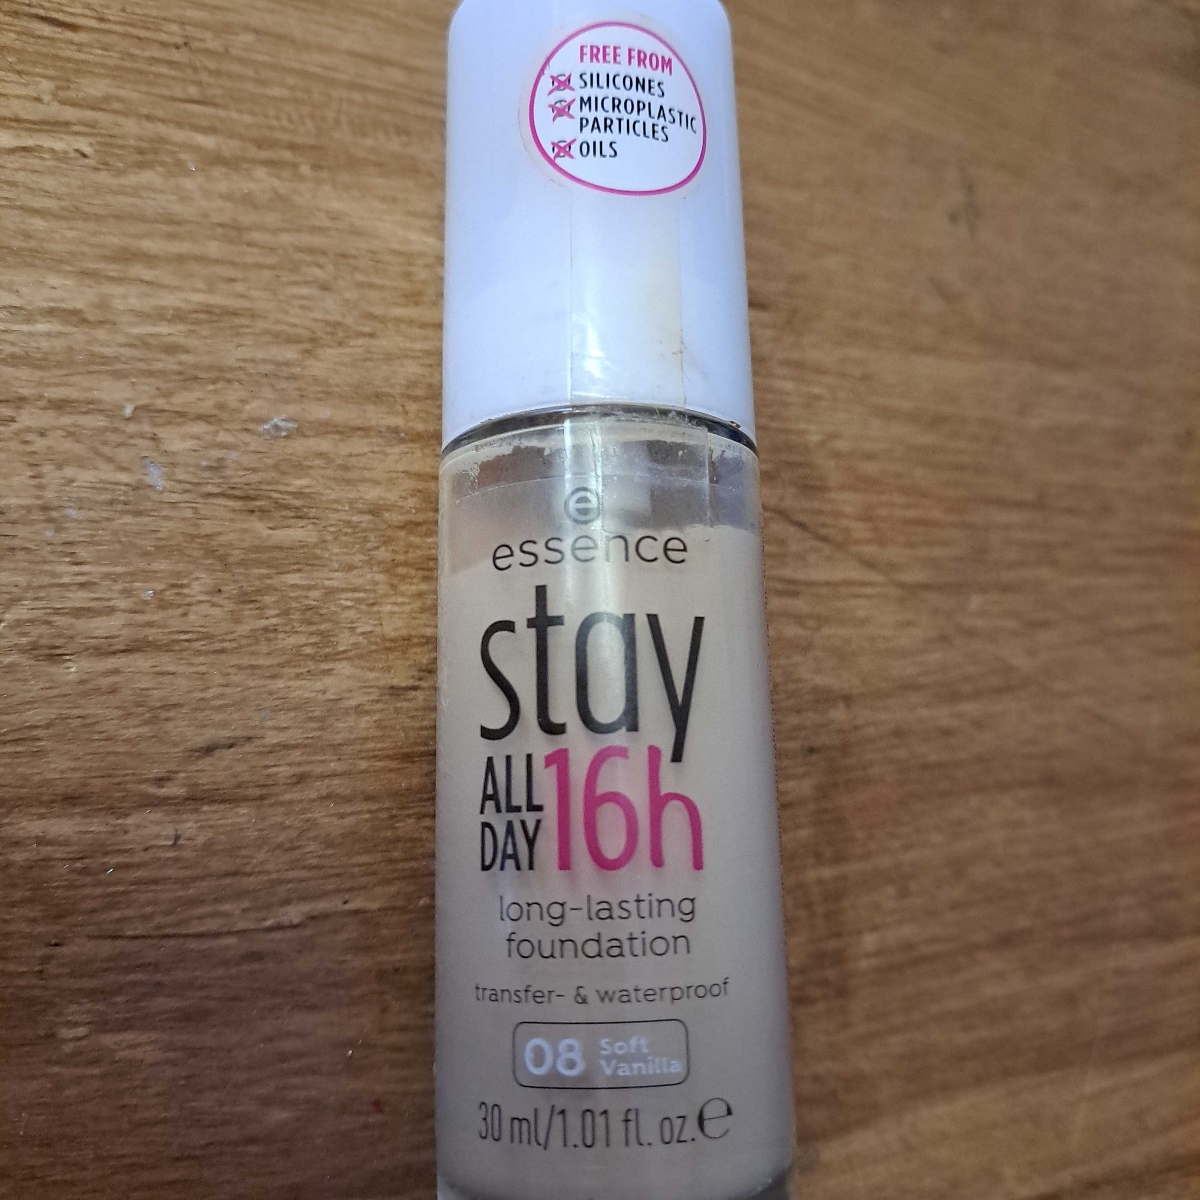 long-lasting | day 16h Reviews soft stay 08 vanilla Essence abillion foundation all